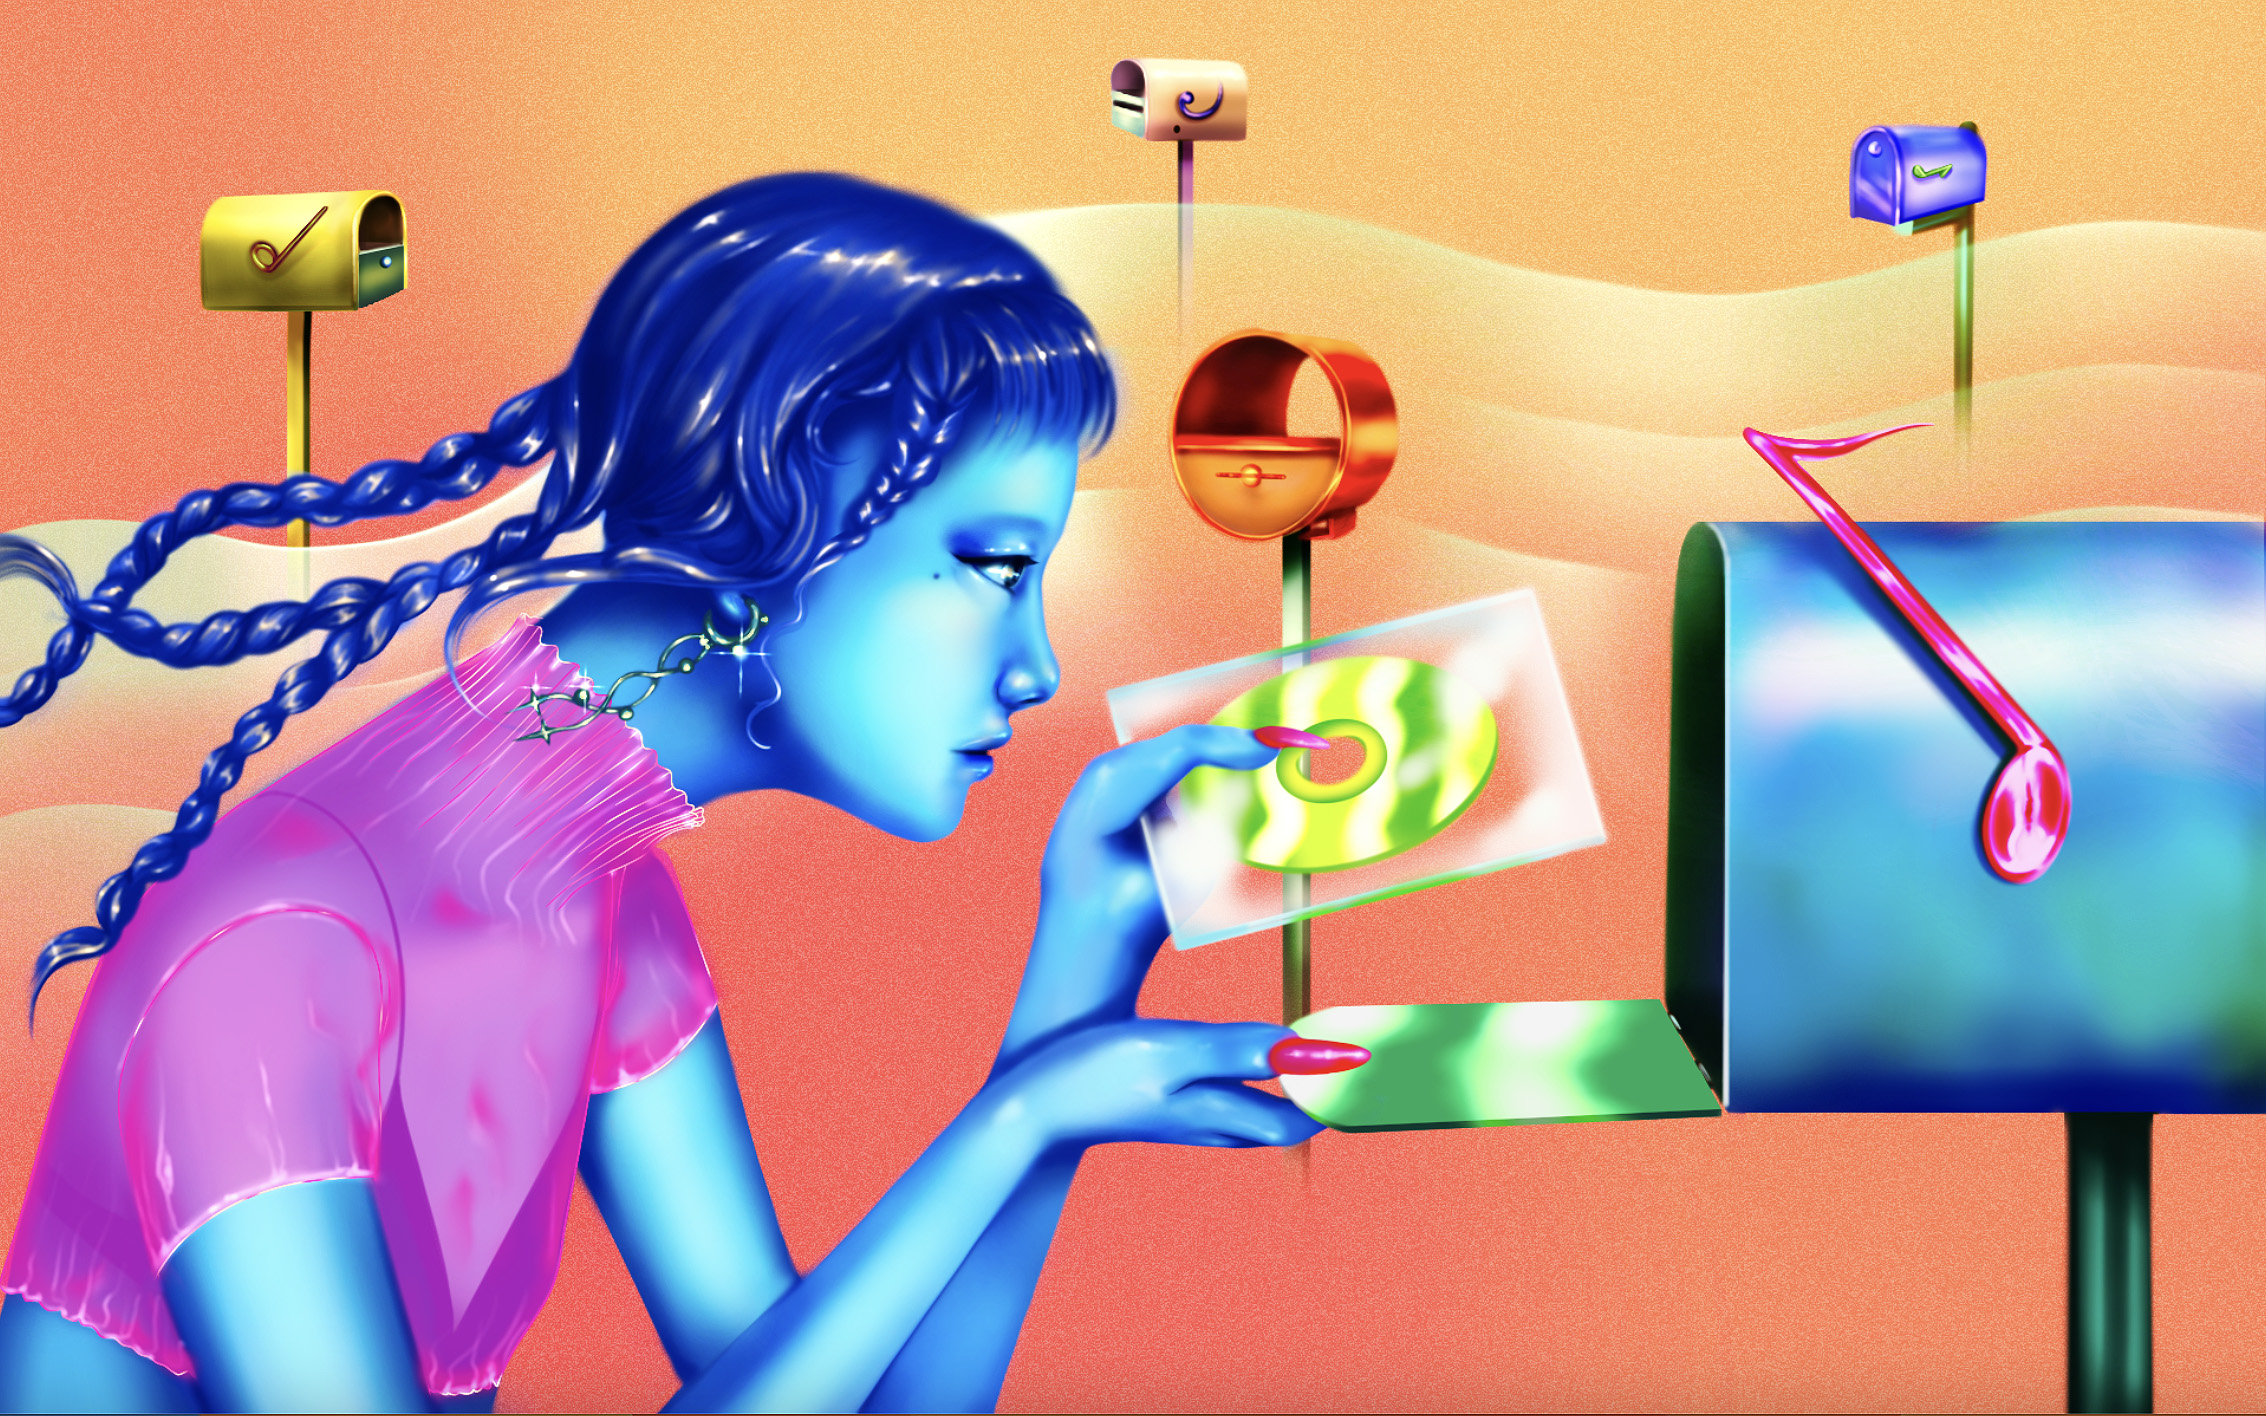 colorful illustration of a girl putting a CD into a mailbox